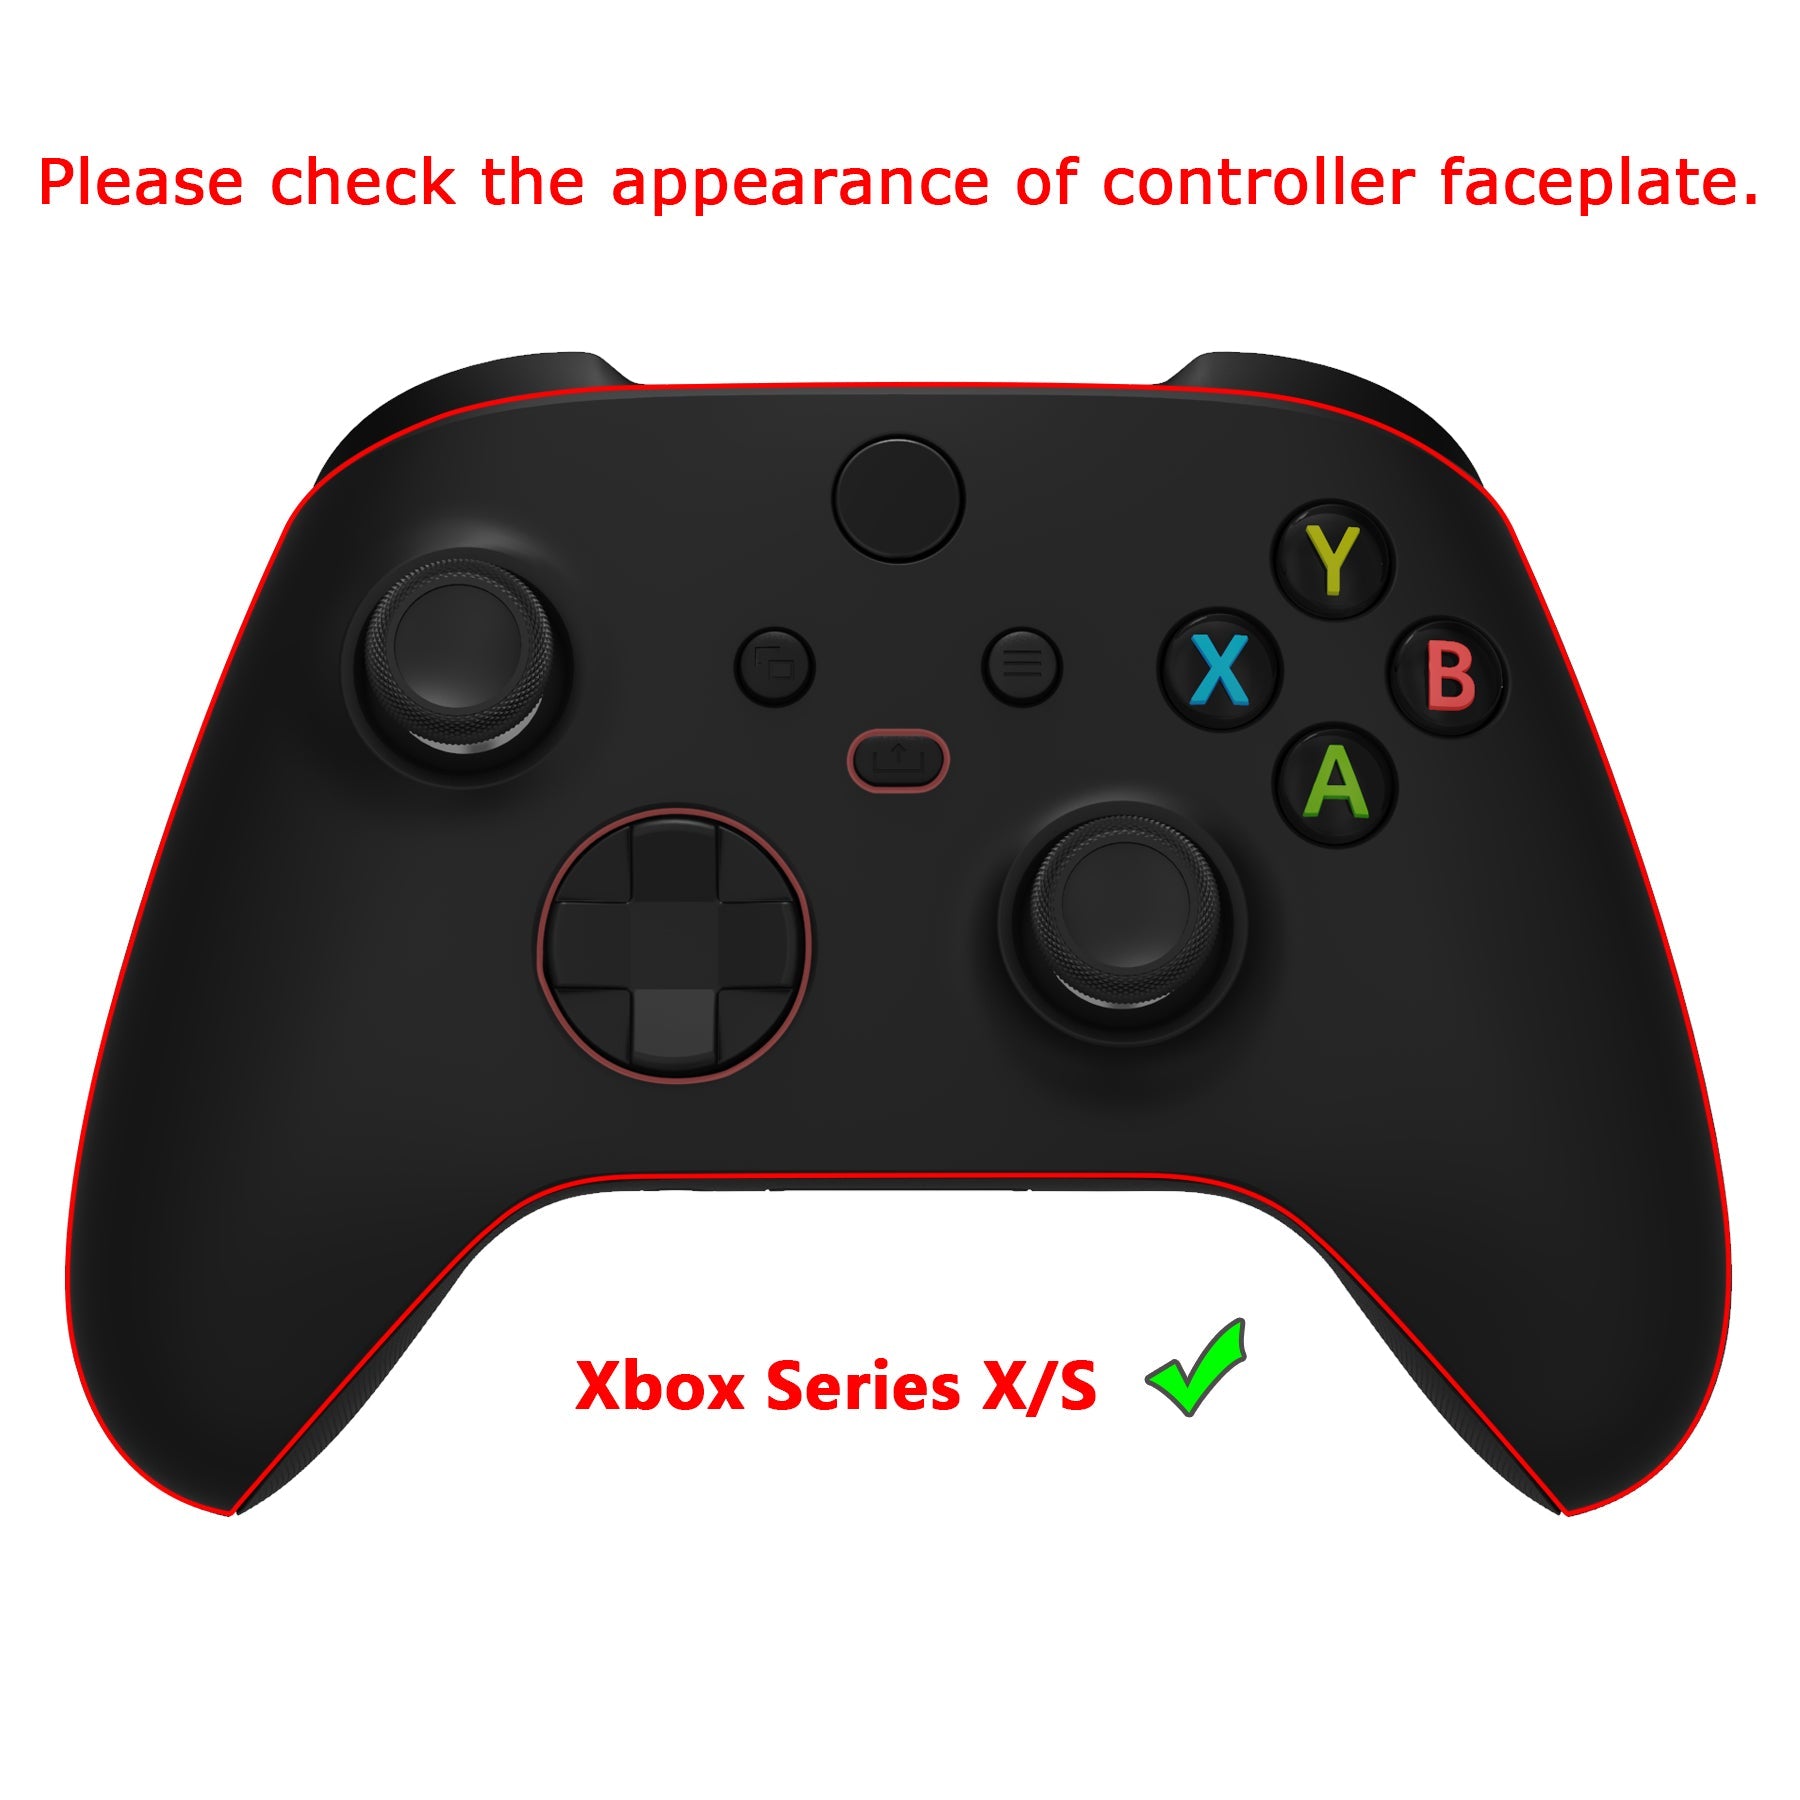 PlayVital Anti-Skid Sweat-Absorbent Controller Grip for Xbox Series X/S Controller, Professional Textured Soft Rubber Pads Handle Grips for Xbox Core Wireless Controller - Scary Party - X3PJ041 PlayVital